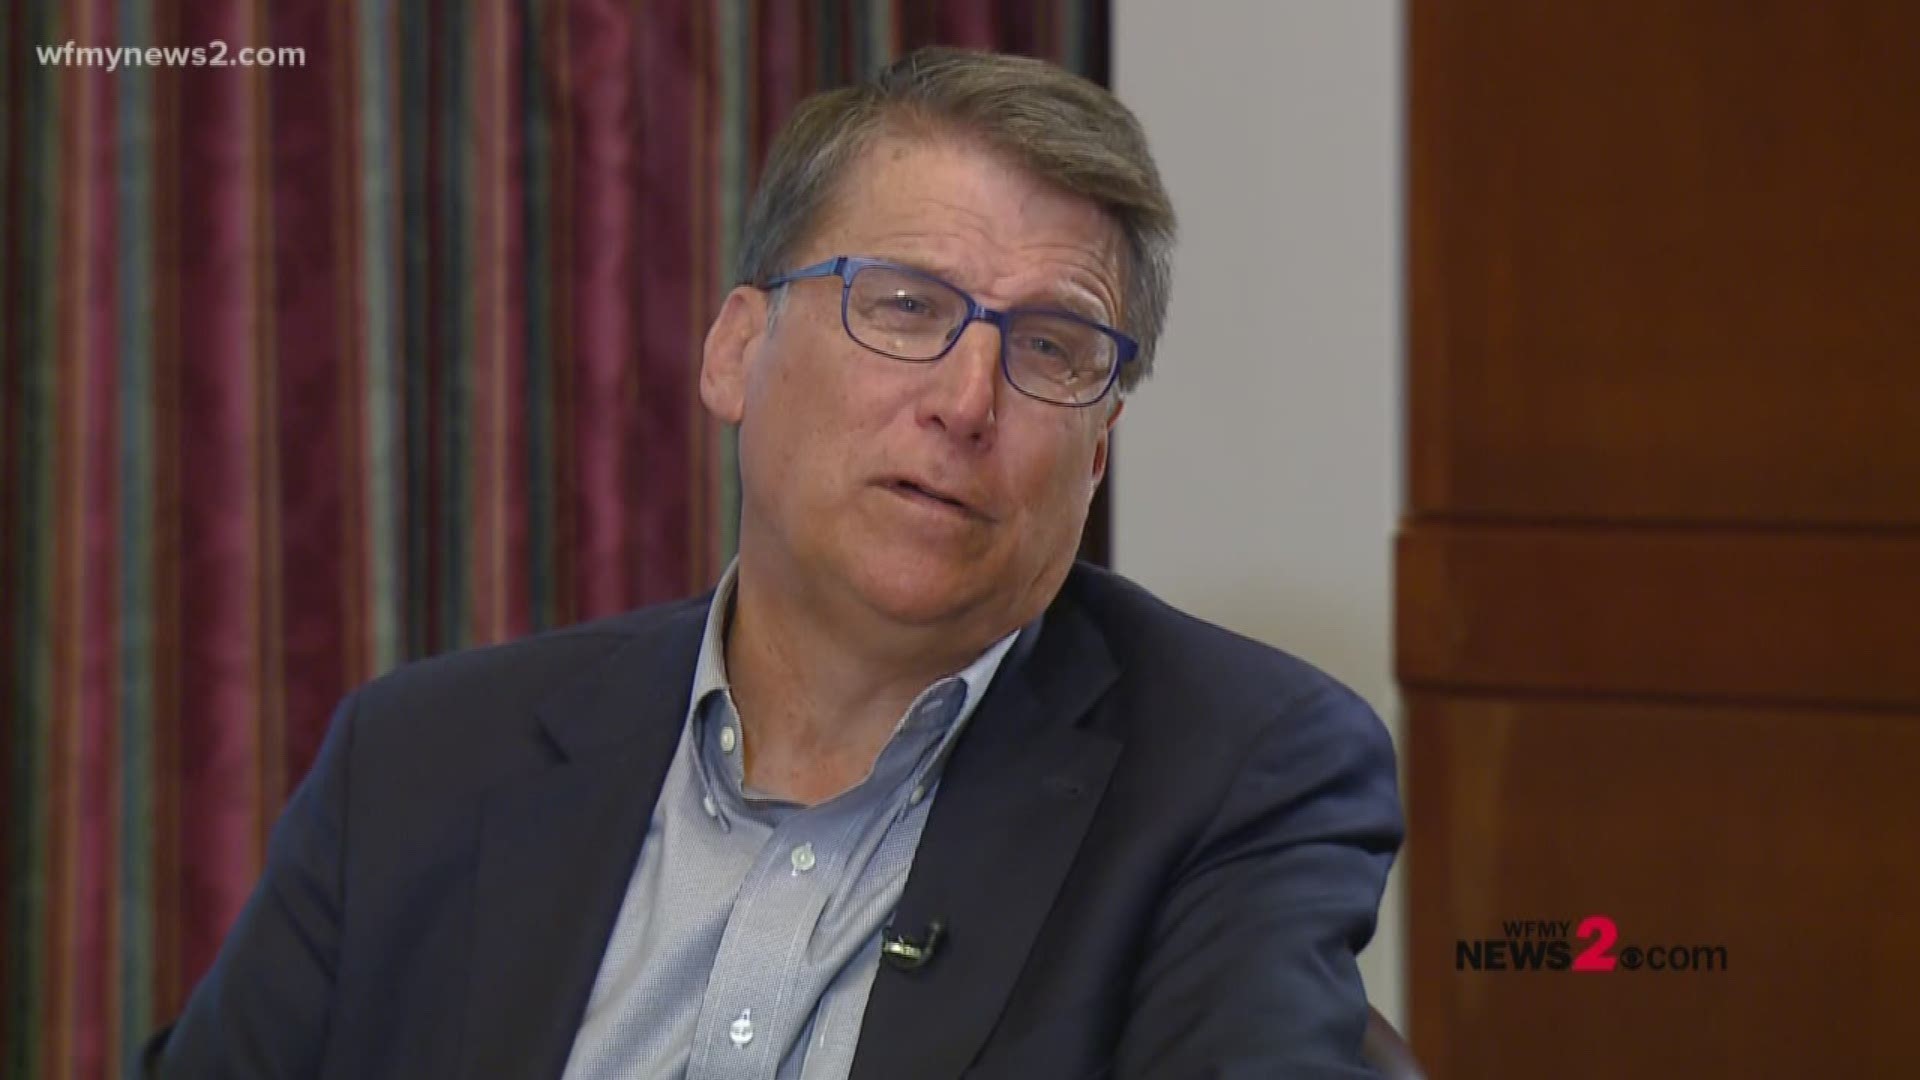 Two years since losing his bid for re-election, former governor Pat McCrory exclusively talks to Meghann Mollerus about the adjustment back to civilian life. Catch the full story Friday, May 3 on WFMY News 2 at 11.